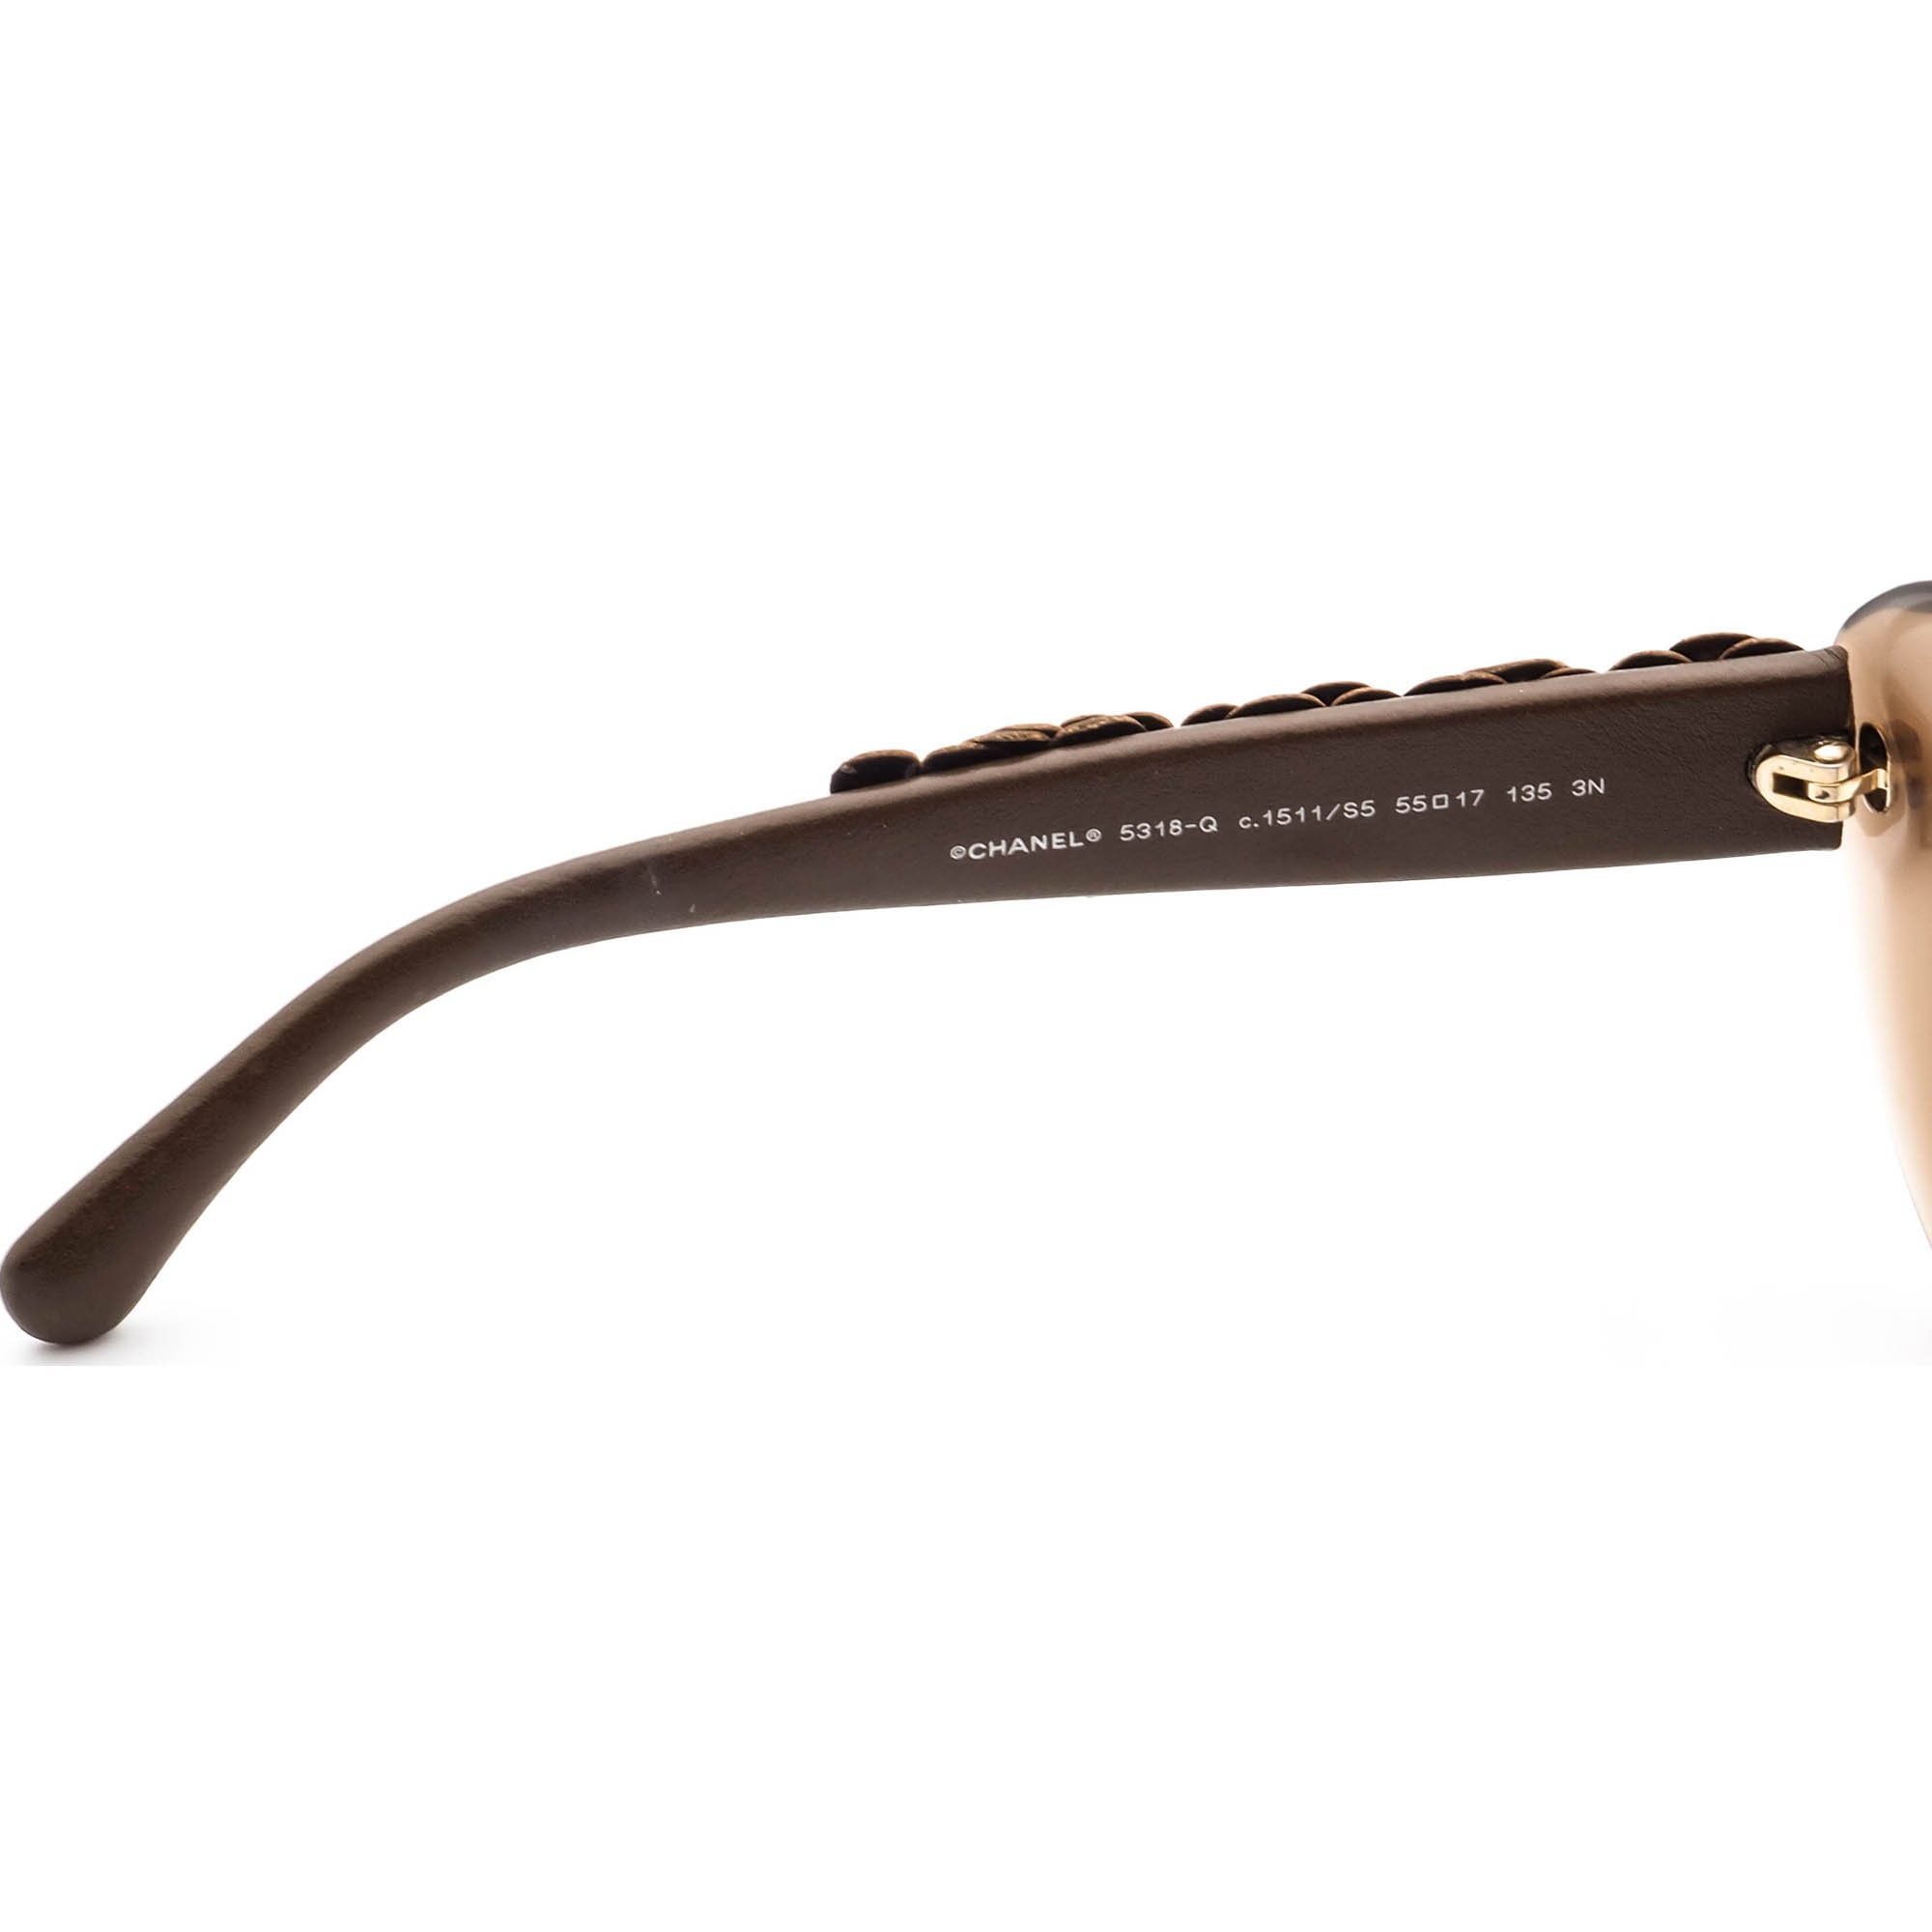 Chanel Sunglasses Frame Only 5318-Q C.1511 Brown & Leather -  Norway